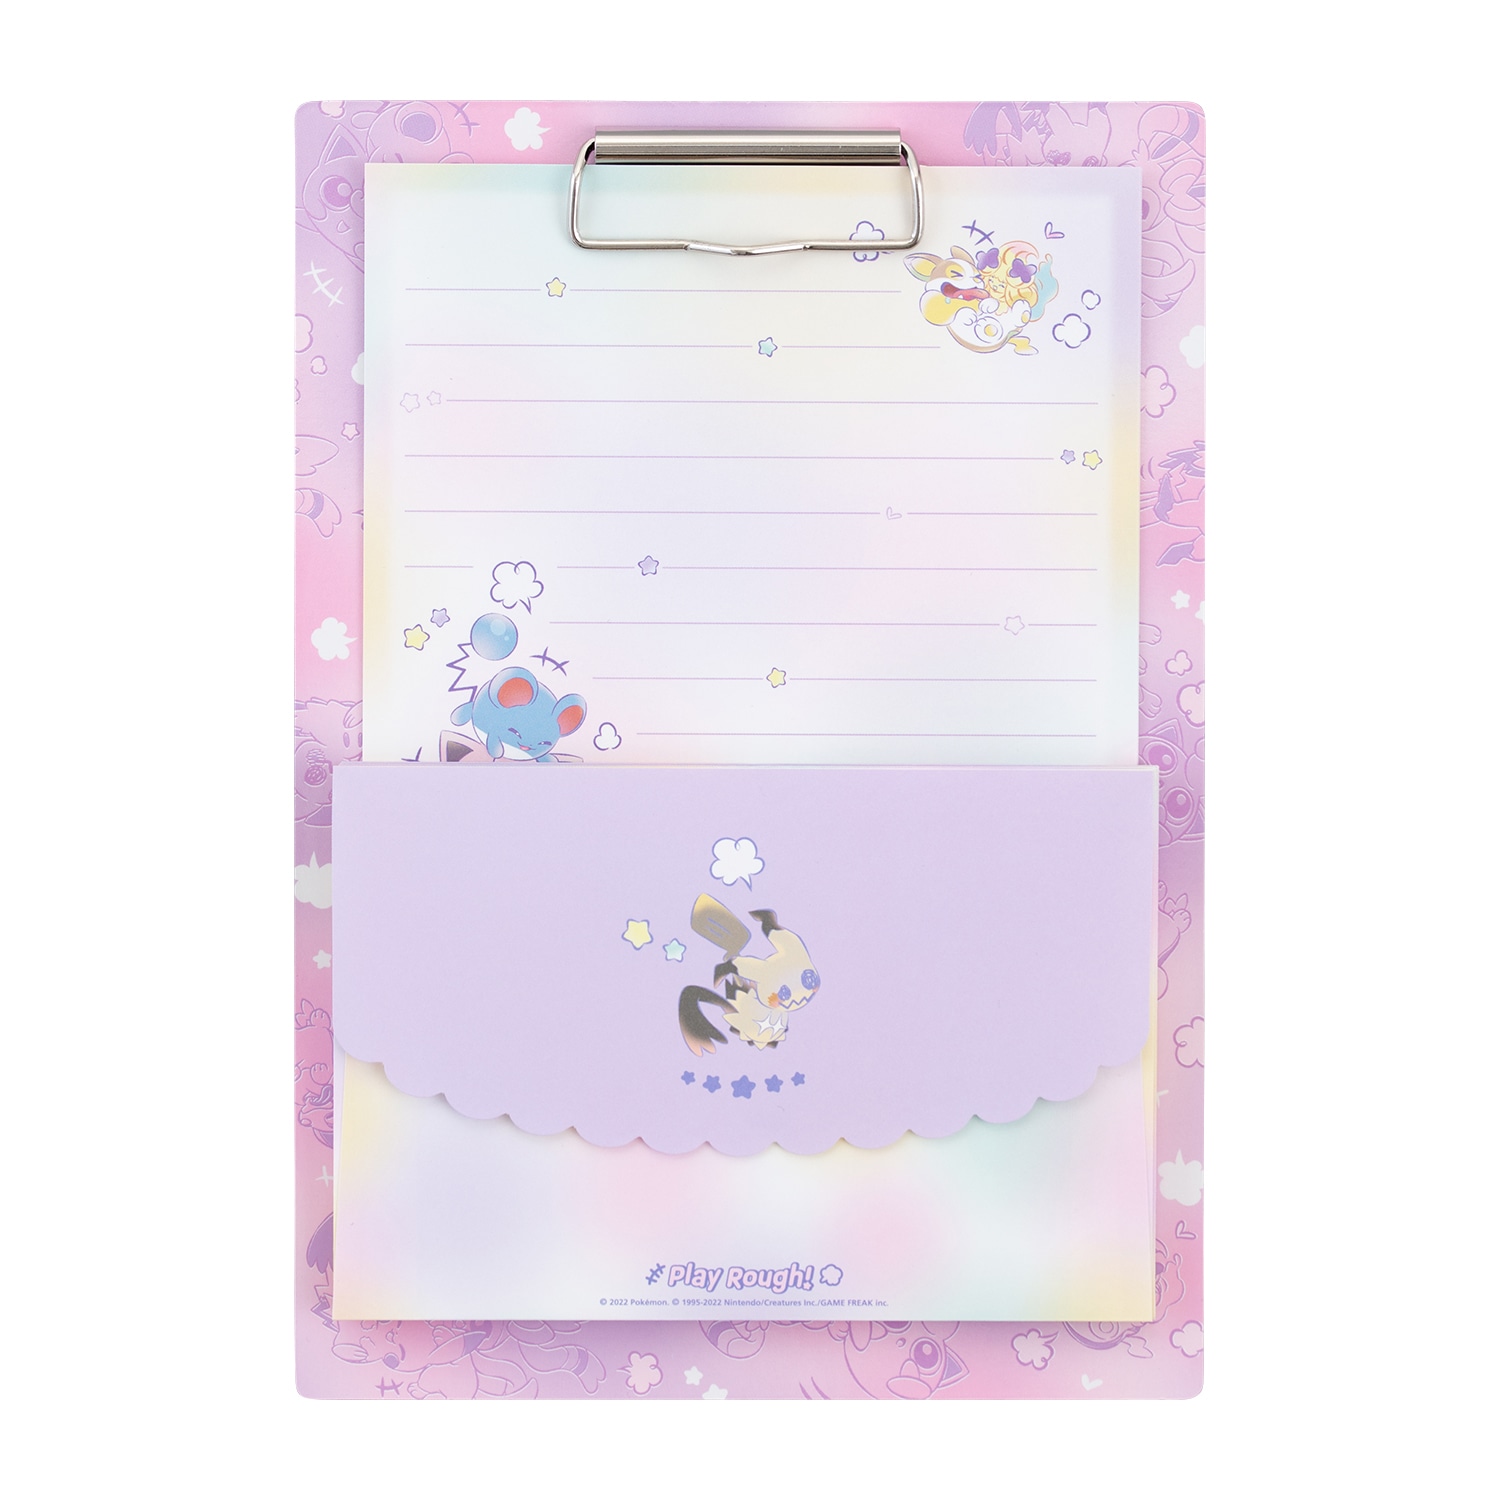 Pokemon Center Letter Set with Binder Play Rough!